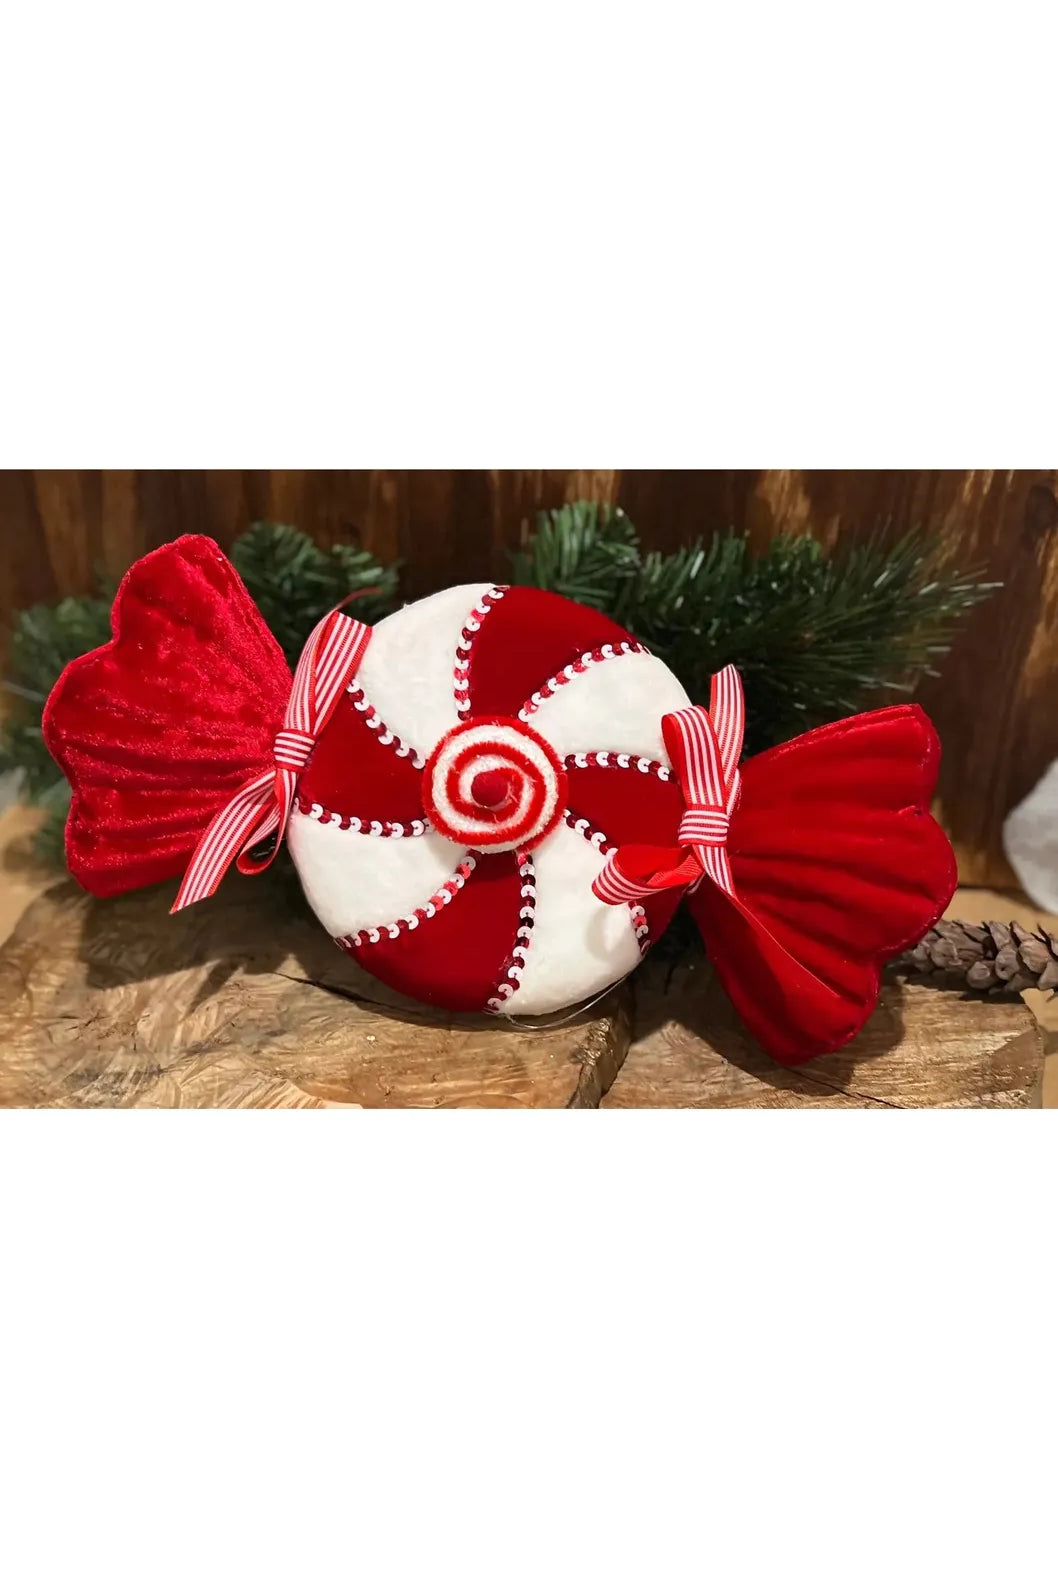 Shop For 14" Fabric Peppermint Candy Ornament: Red & White MTX69438RDWH